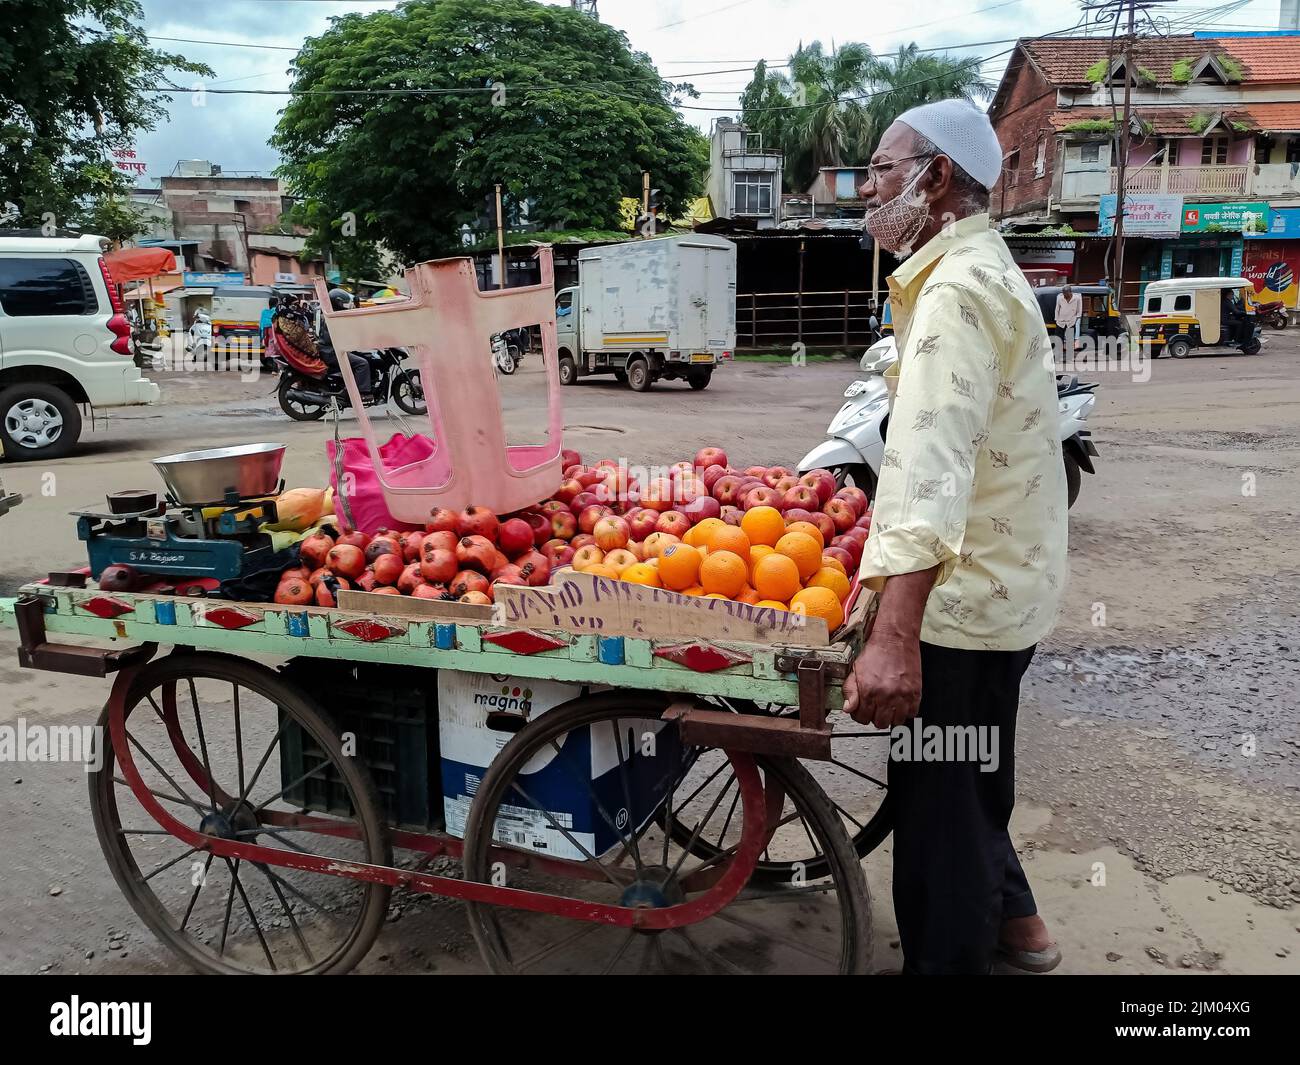 Kolhapur, India- July 16th 2021; Stock photo of 50 to 60 year old Indian fruit seller selling fresh fruits like apple , orange etc on wooden cart in c Stock Photo